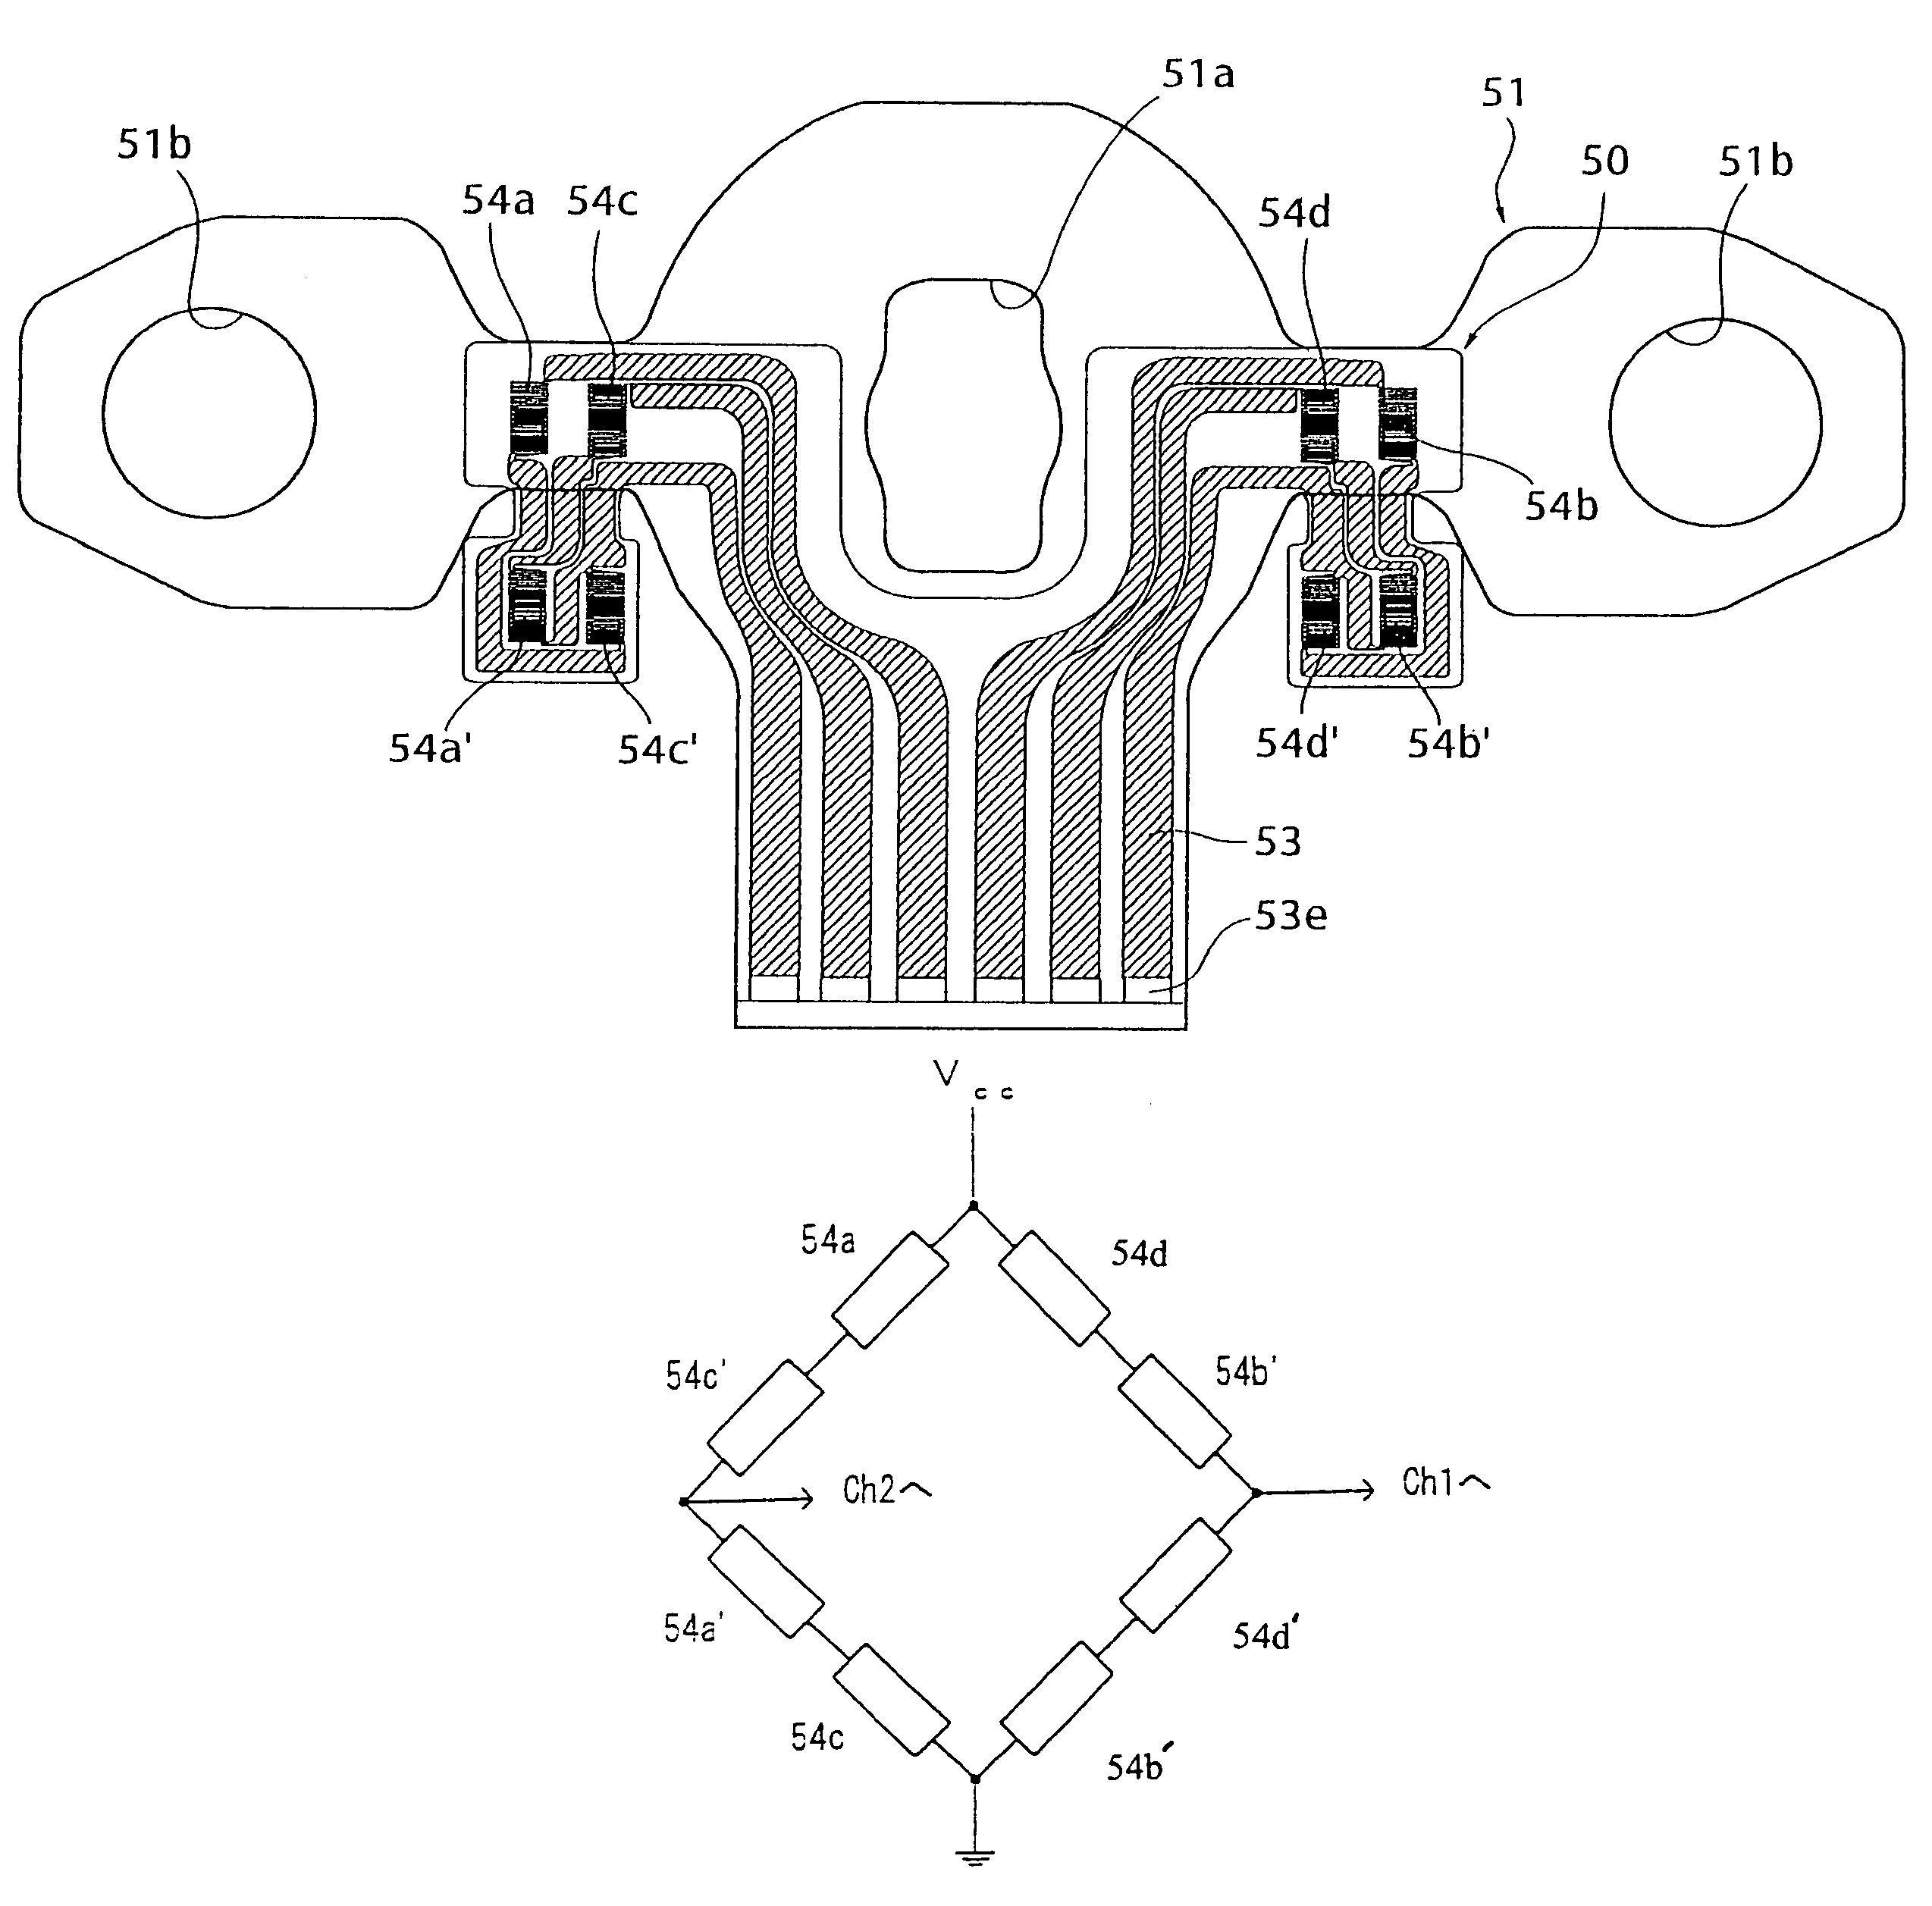 Load sensor and seat weight measuring apparatus with a plurality of strain gauges